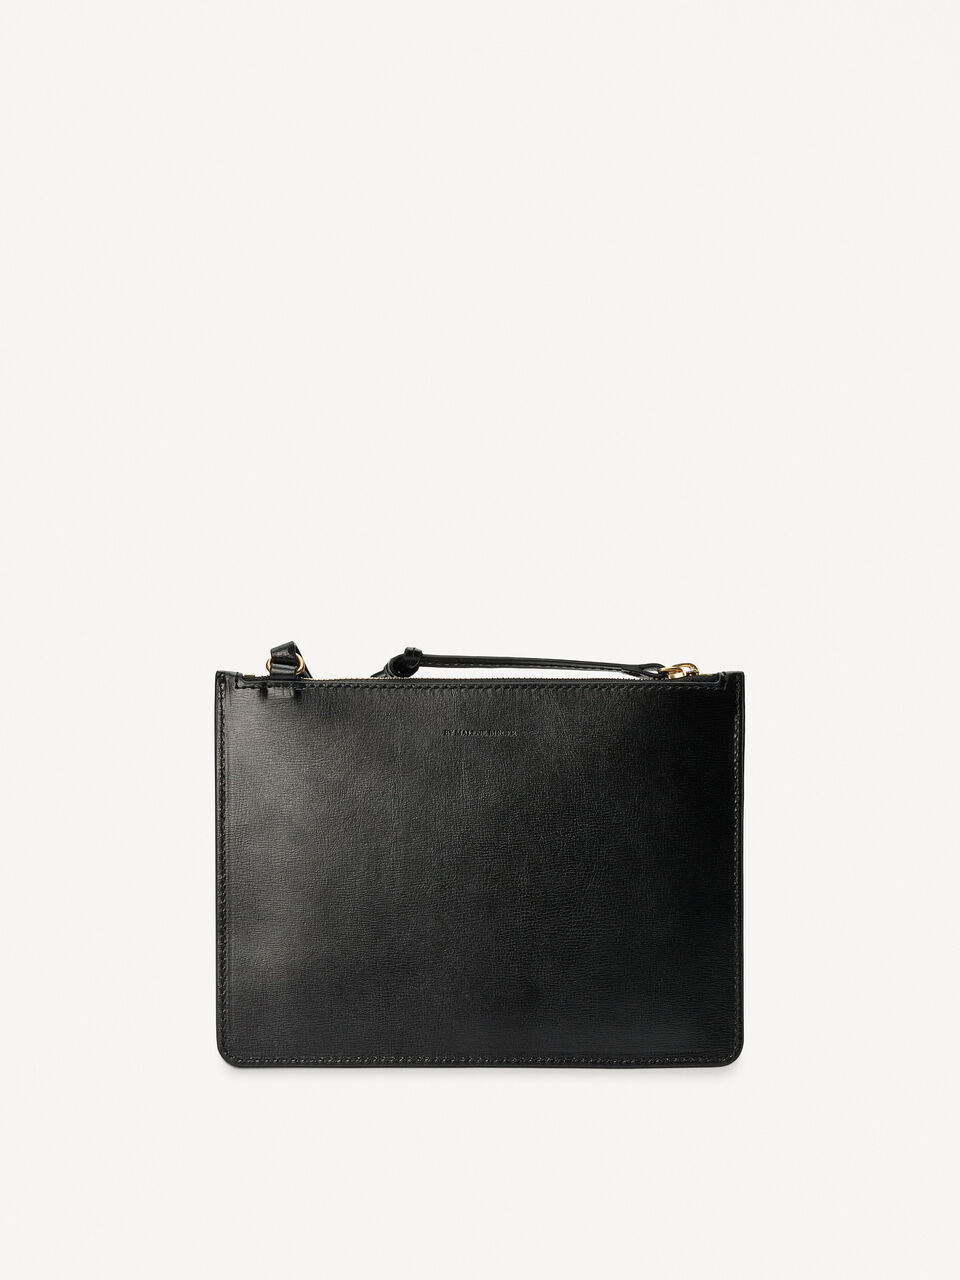 Aya leather phone pouch - By Malene Birger